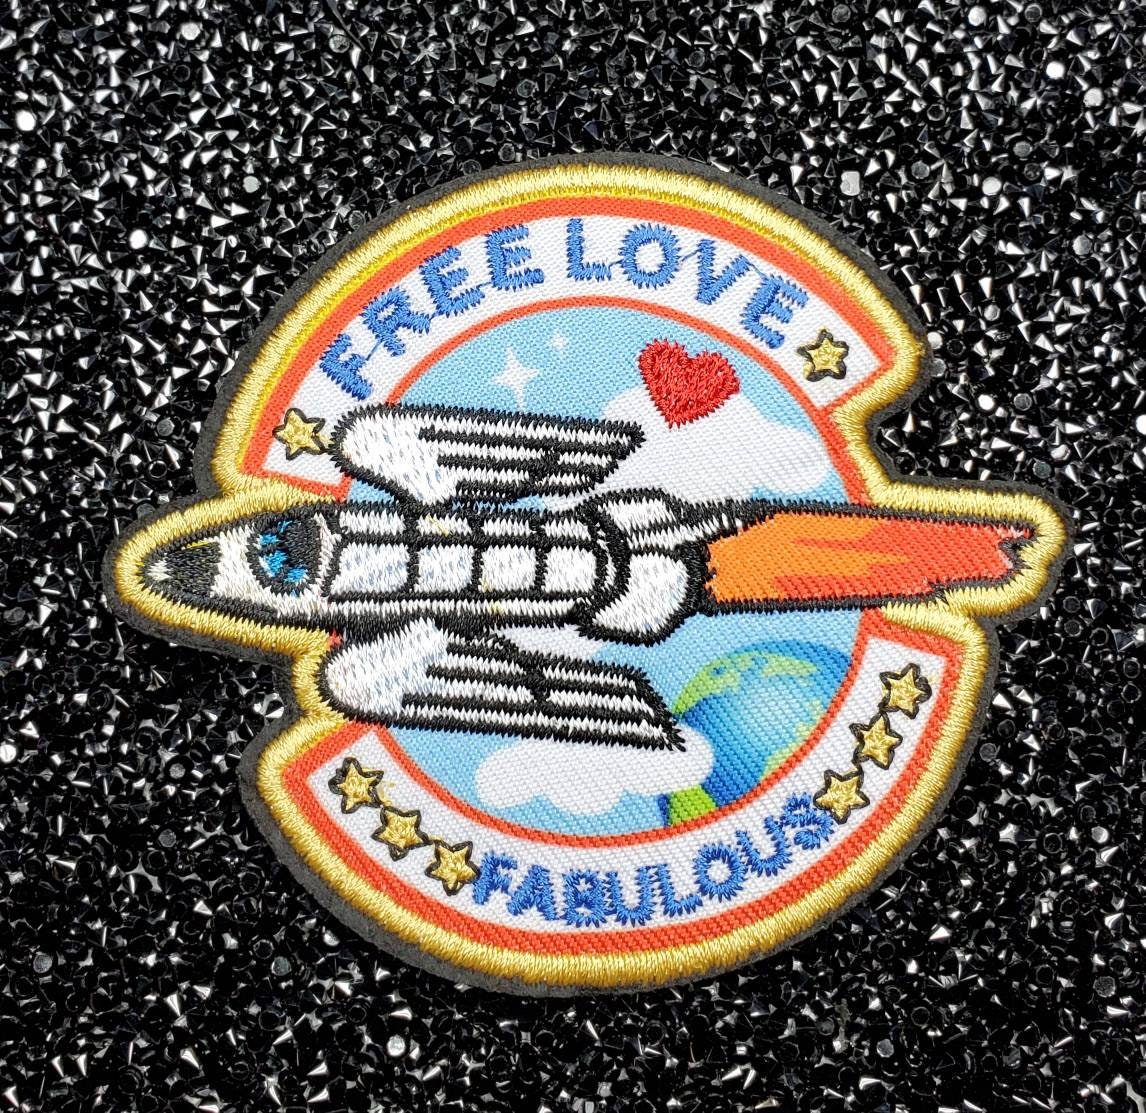 New Arrival, "Free Love" Colorful and Fun, Fabulous, Rocket Ship Patch, Iron-On Embroidered Patches, 3-inch Applique, Small Patch for Jacket